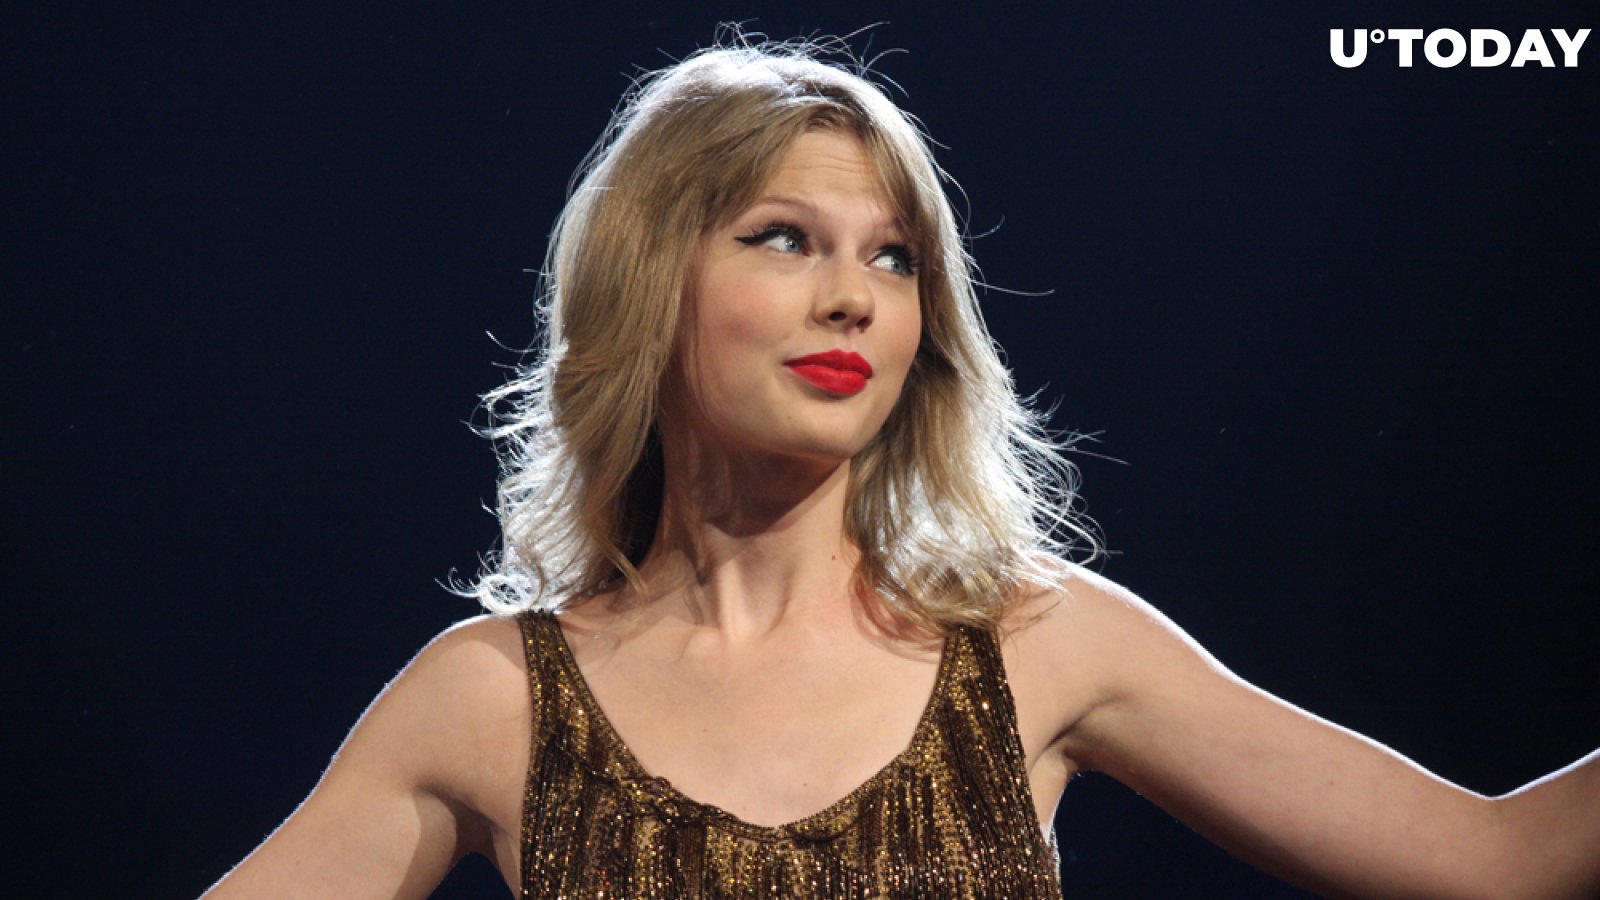 Bitcoin Outshines Taylor Swift in Google Searches